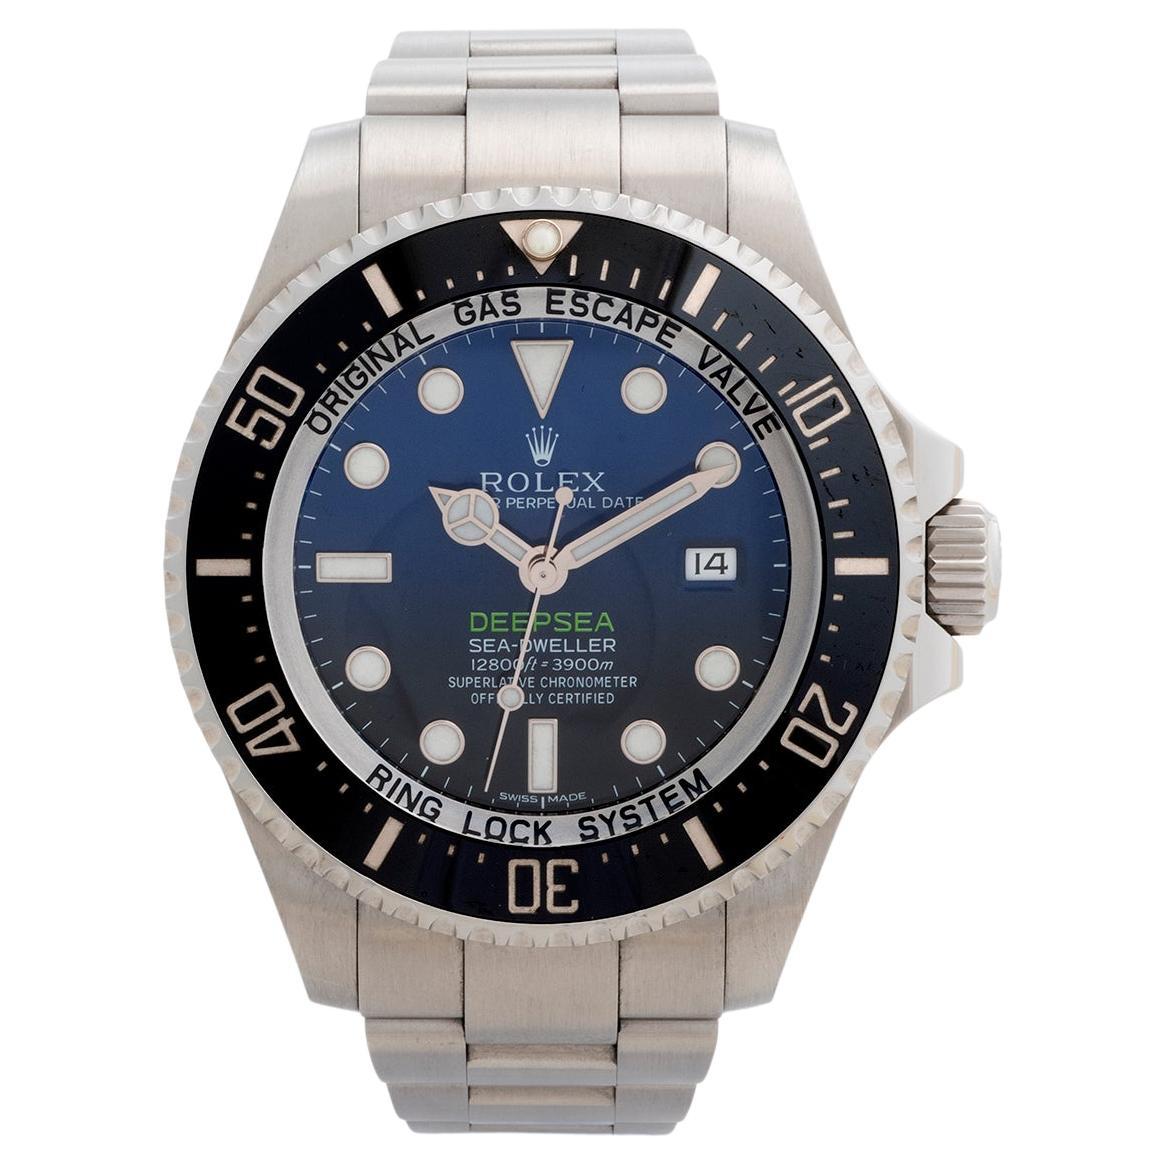 Our Rolex Seadweller Deepsea 116660 D Blue aka the James Cameron, features a 44mm stainless steel case with stainless steel bracelet. This example is presented in outstanding condition, unpolished prior to retail and with only light signs of use